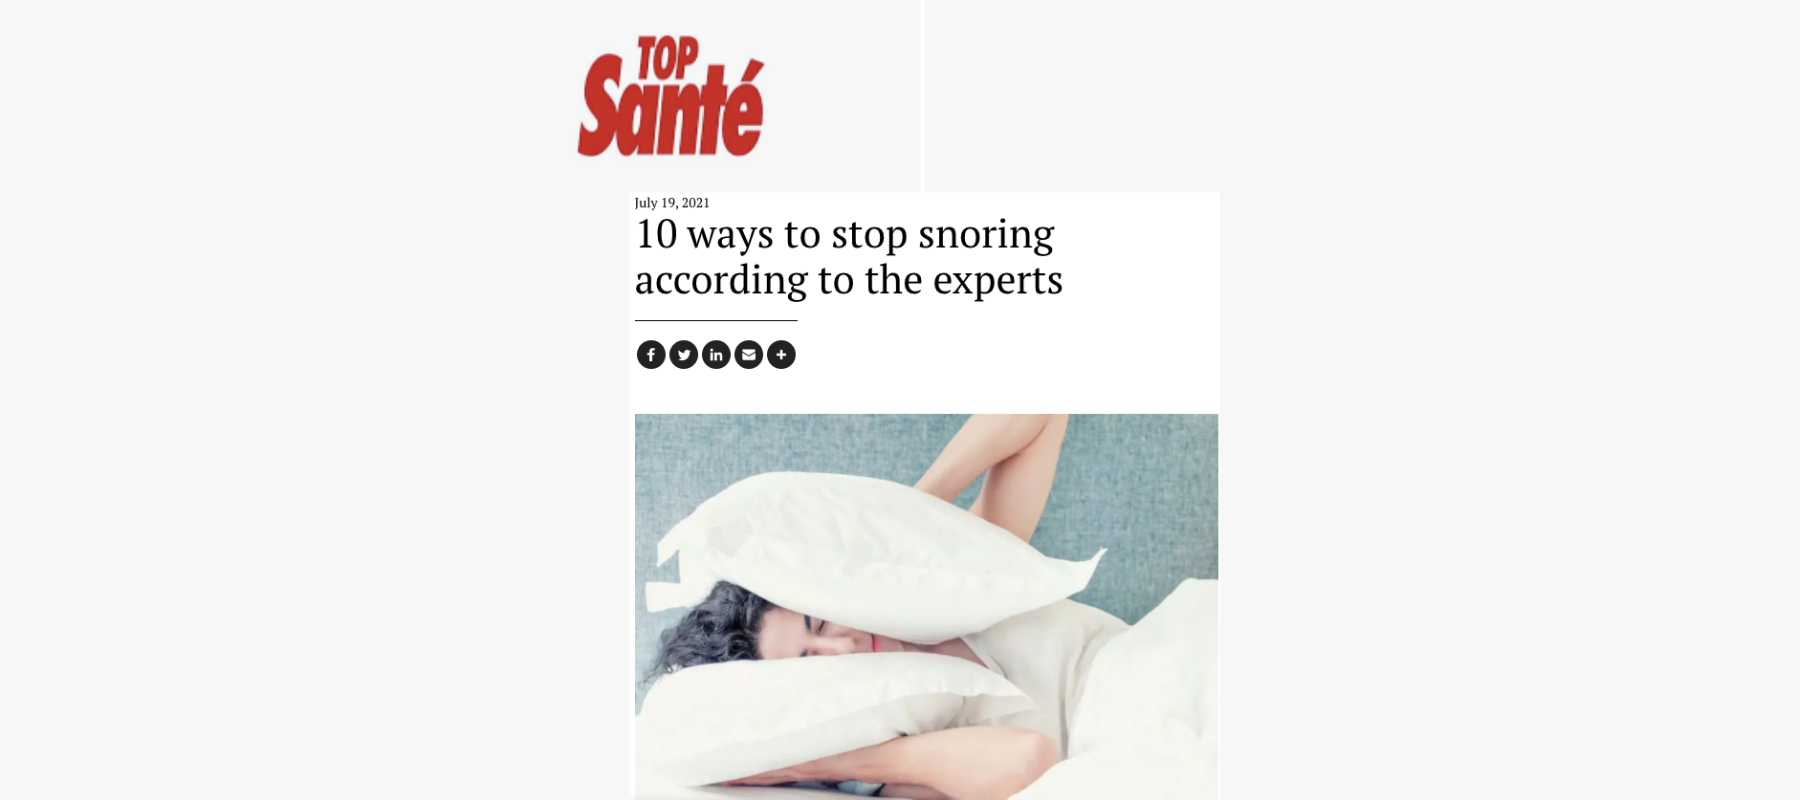 Top Sante - Somnilase: 10 ways to stop snoring according to the experts